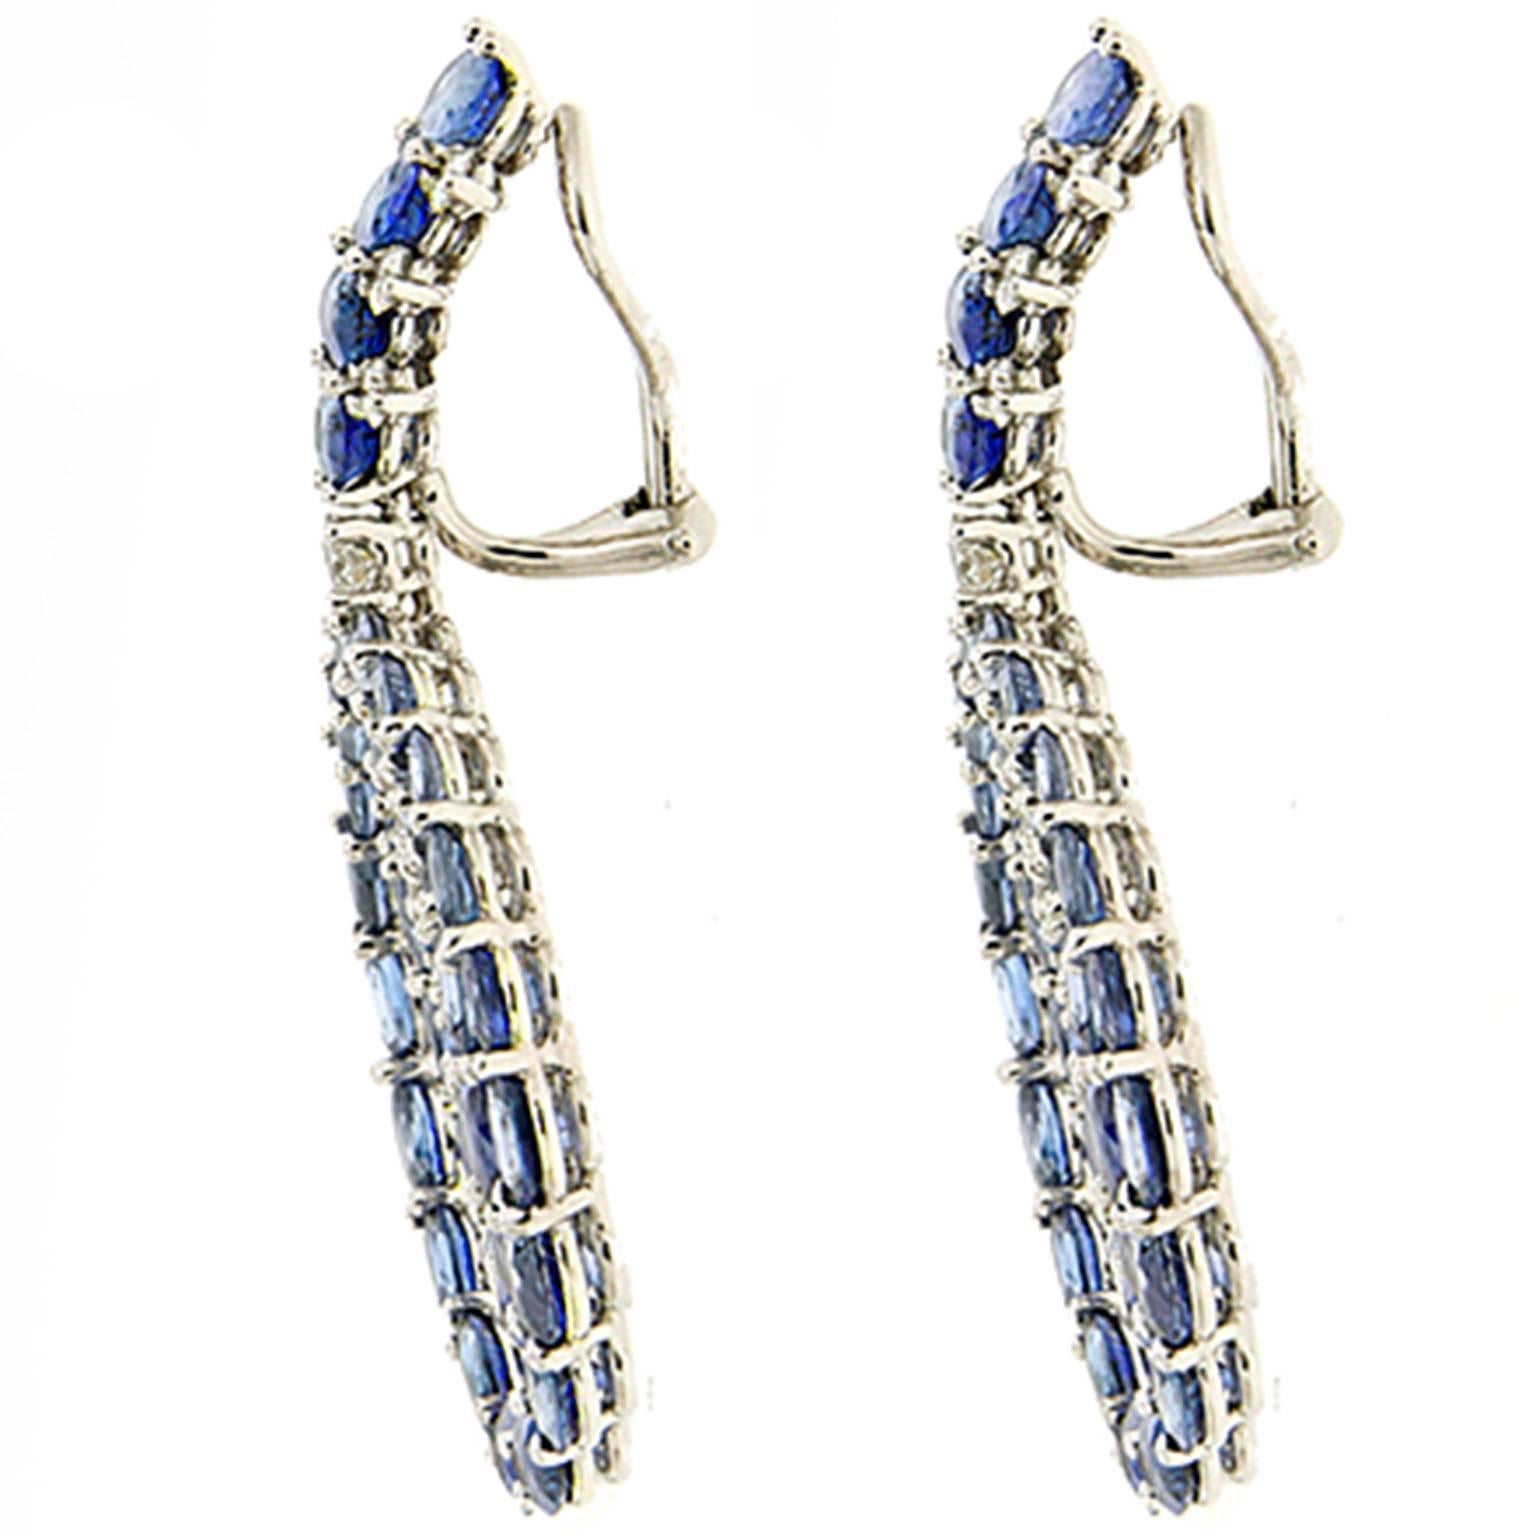 This amazing pair of earrings features beautiful oval blue sapphires in different sizes and shades with diamond accents. The earrings are finished in platinum with clip backs.